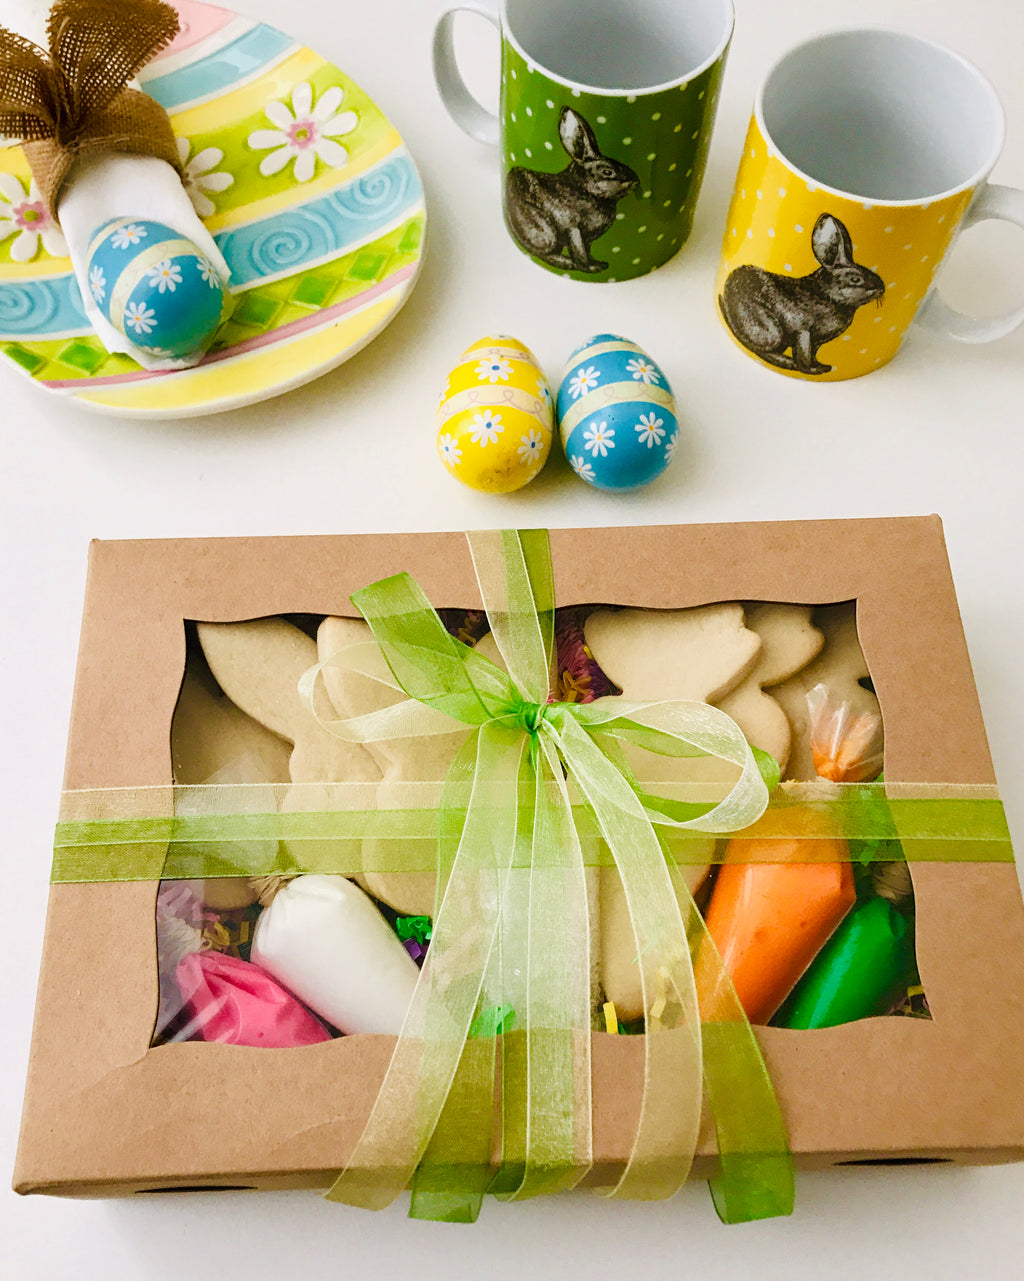 DECORATE YOUR OWN EASTER COOKIE KIT!